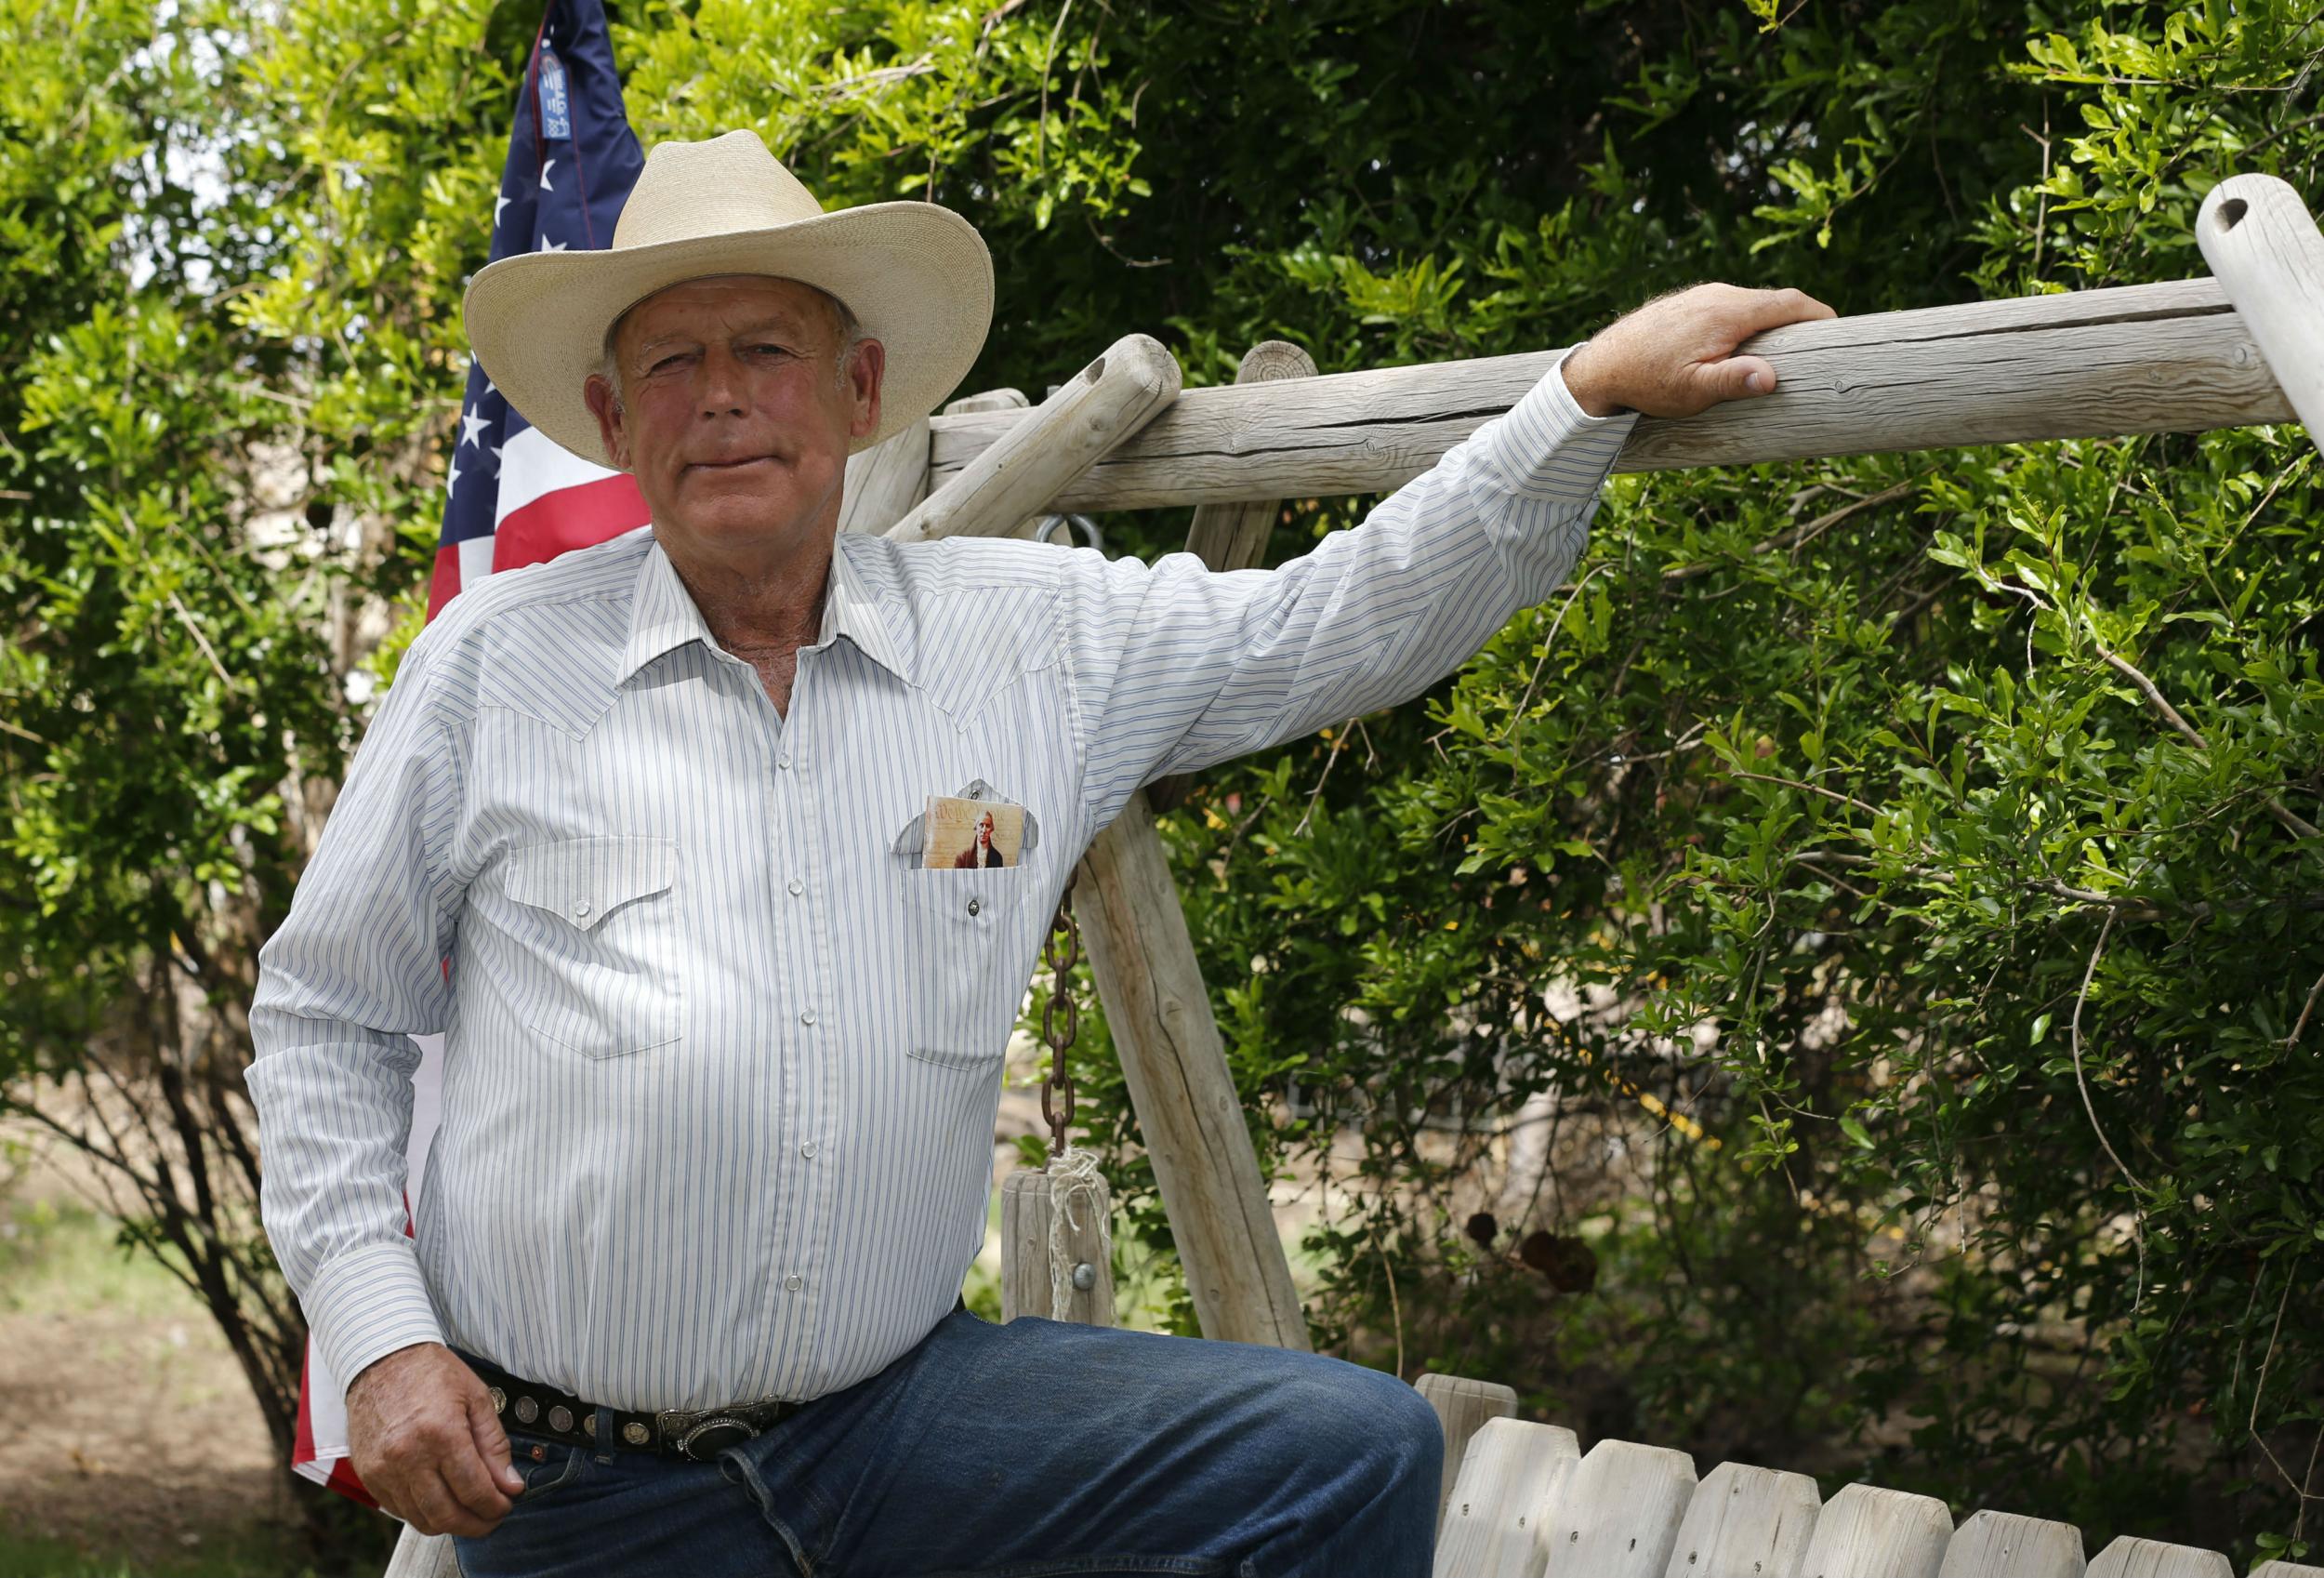 Cliven Bundy has broken his silence and vowed for the stand-off between ranchers and federal land management to continue